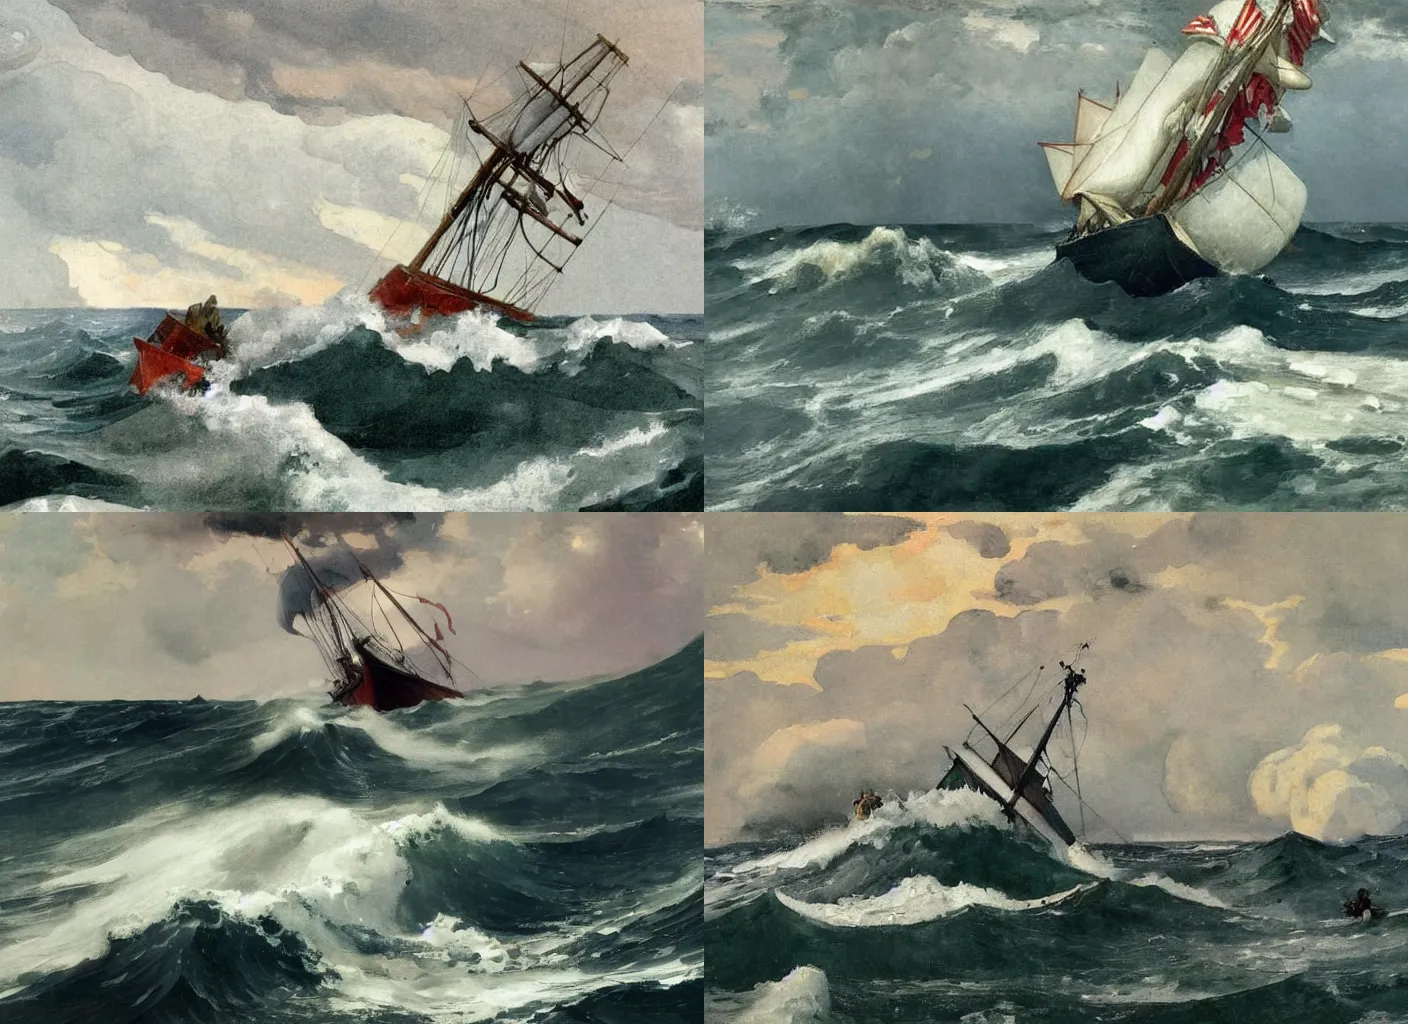 Prompt: painting of Kirby manning a ship being tossed about by the stormy sea painted by Winslow Homer, dramatic nautical scene, dangerous waves, masterwork painting of the tumultuous North Sea